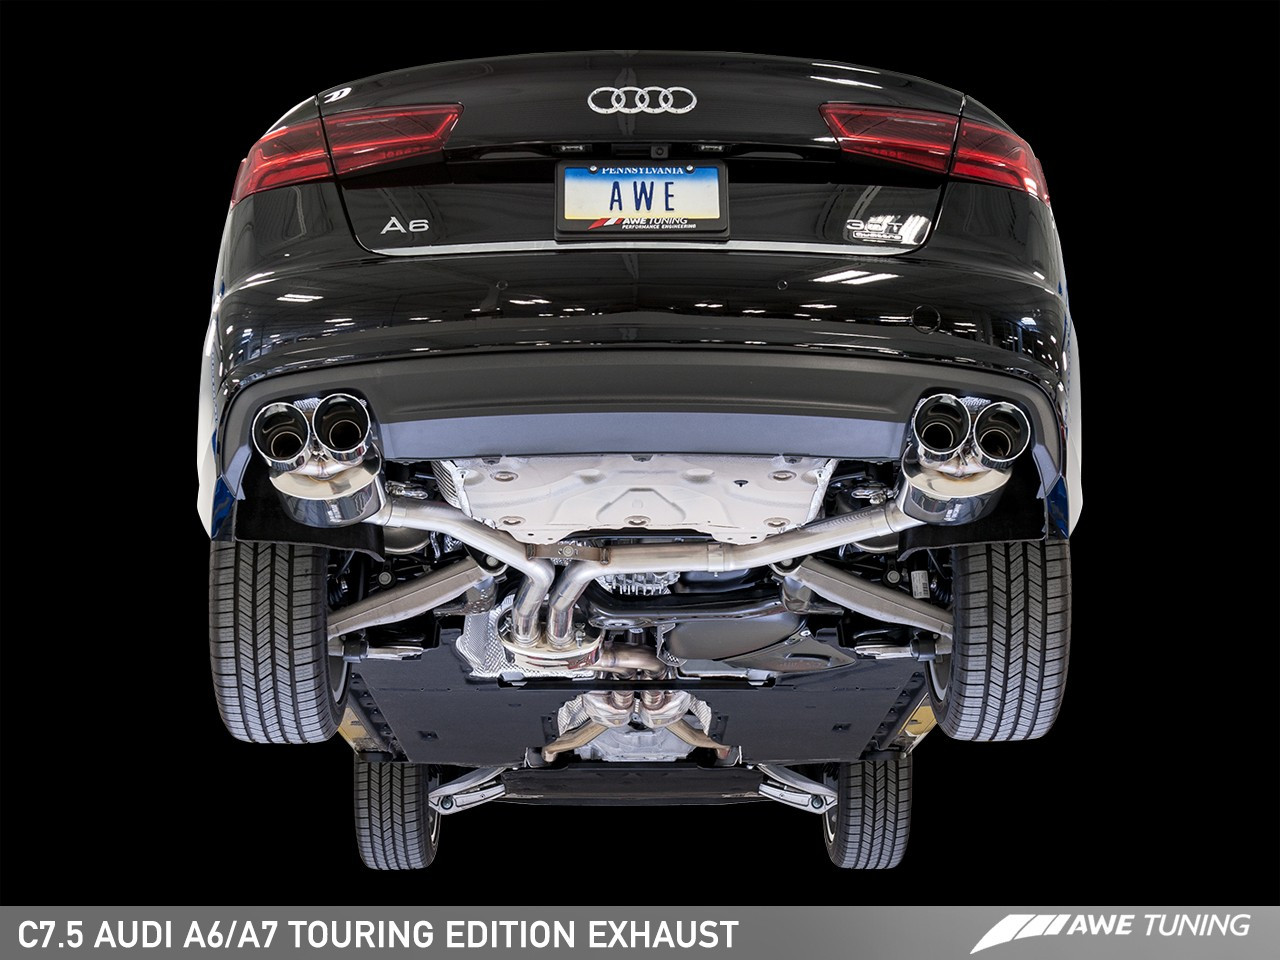 AWE Touring Edition Catback Exhaust for C7.5 A7 3.0T